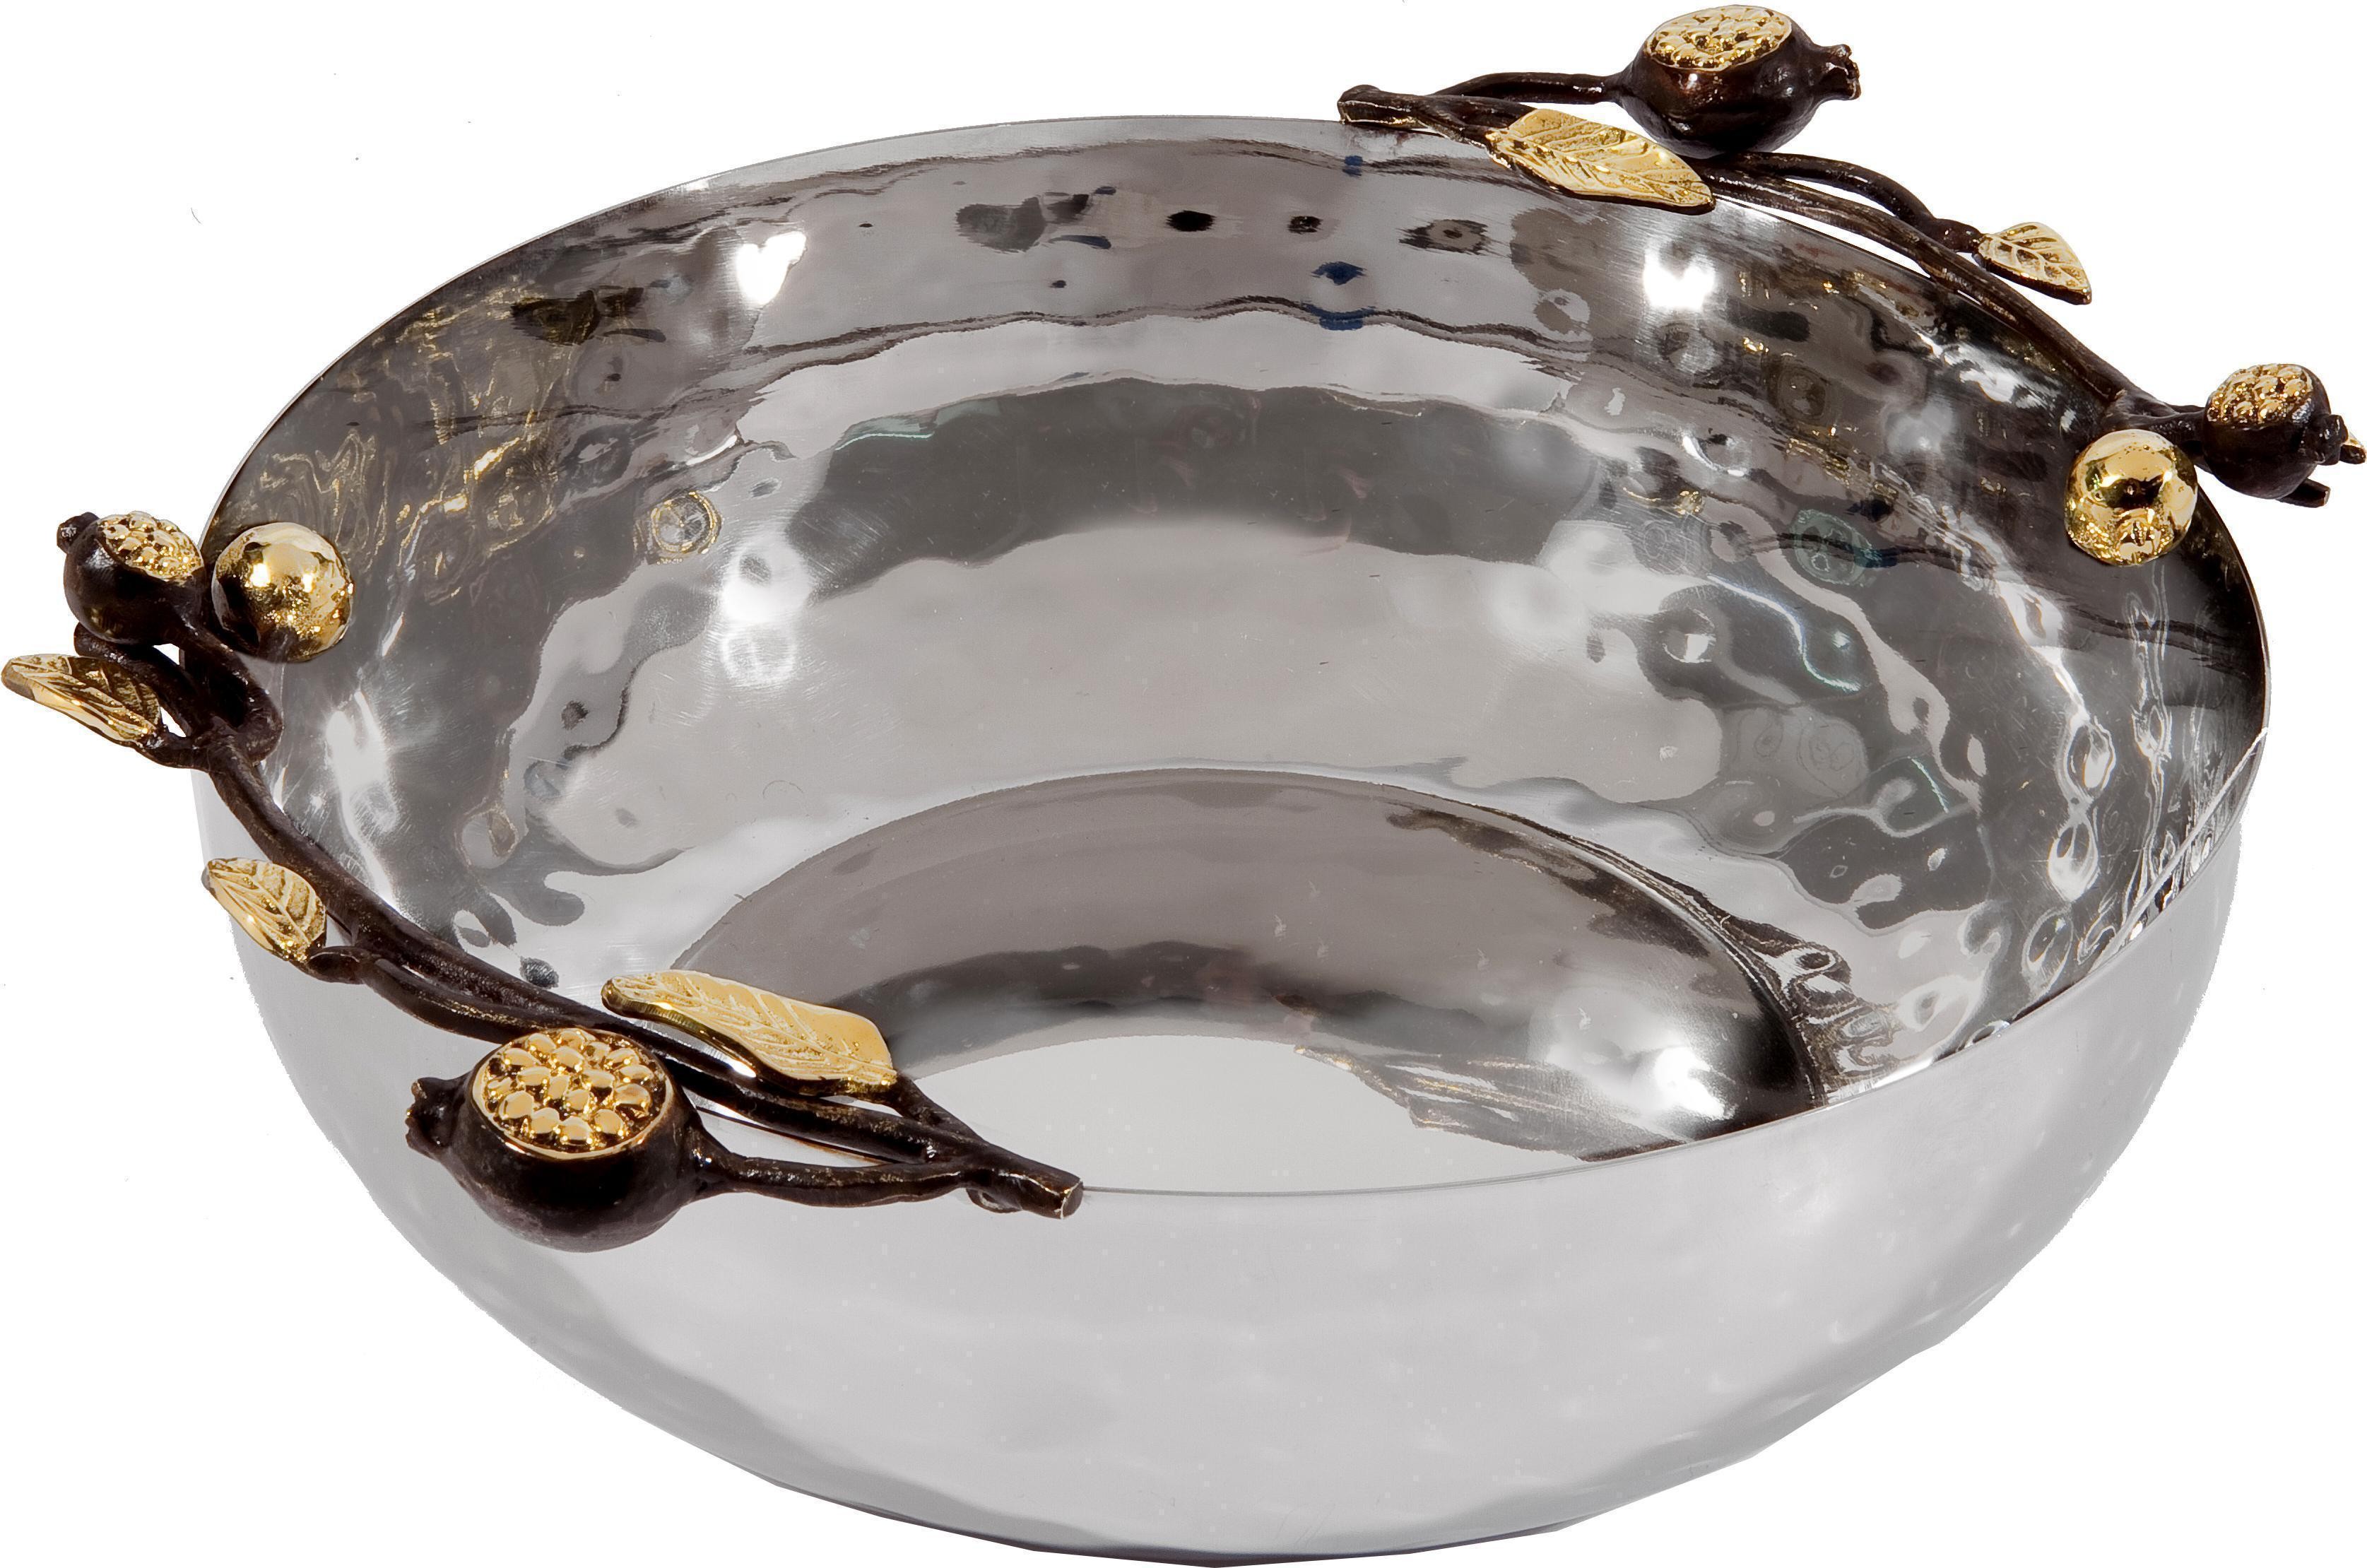 Yair Emanuel Steel Bowl with Pomegranate Branch